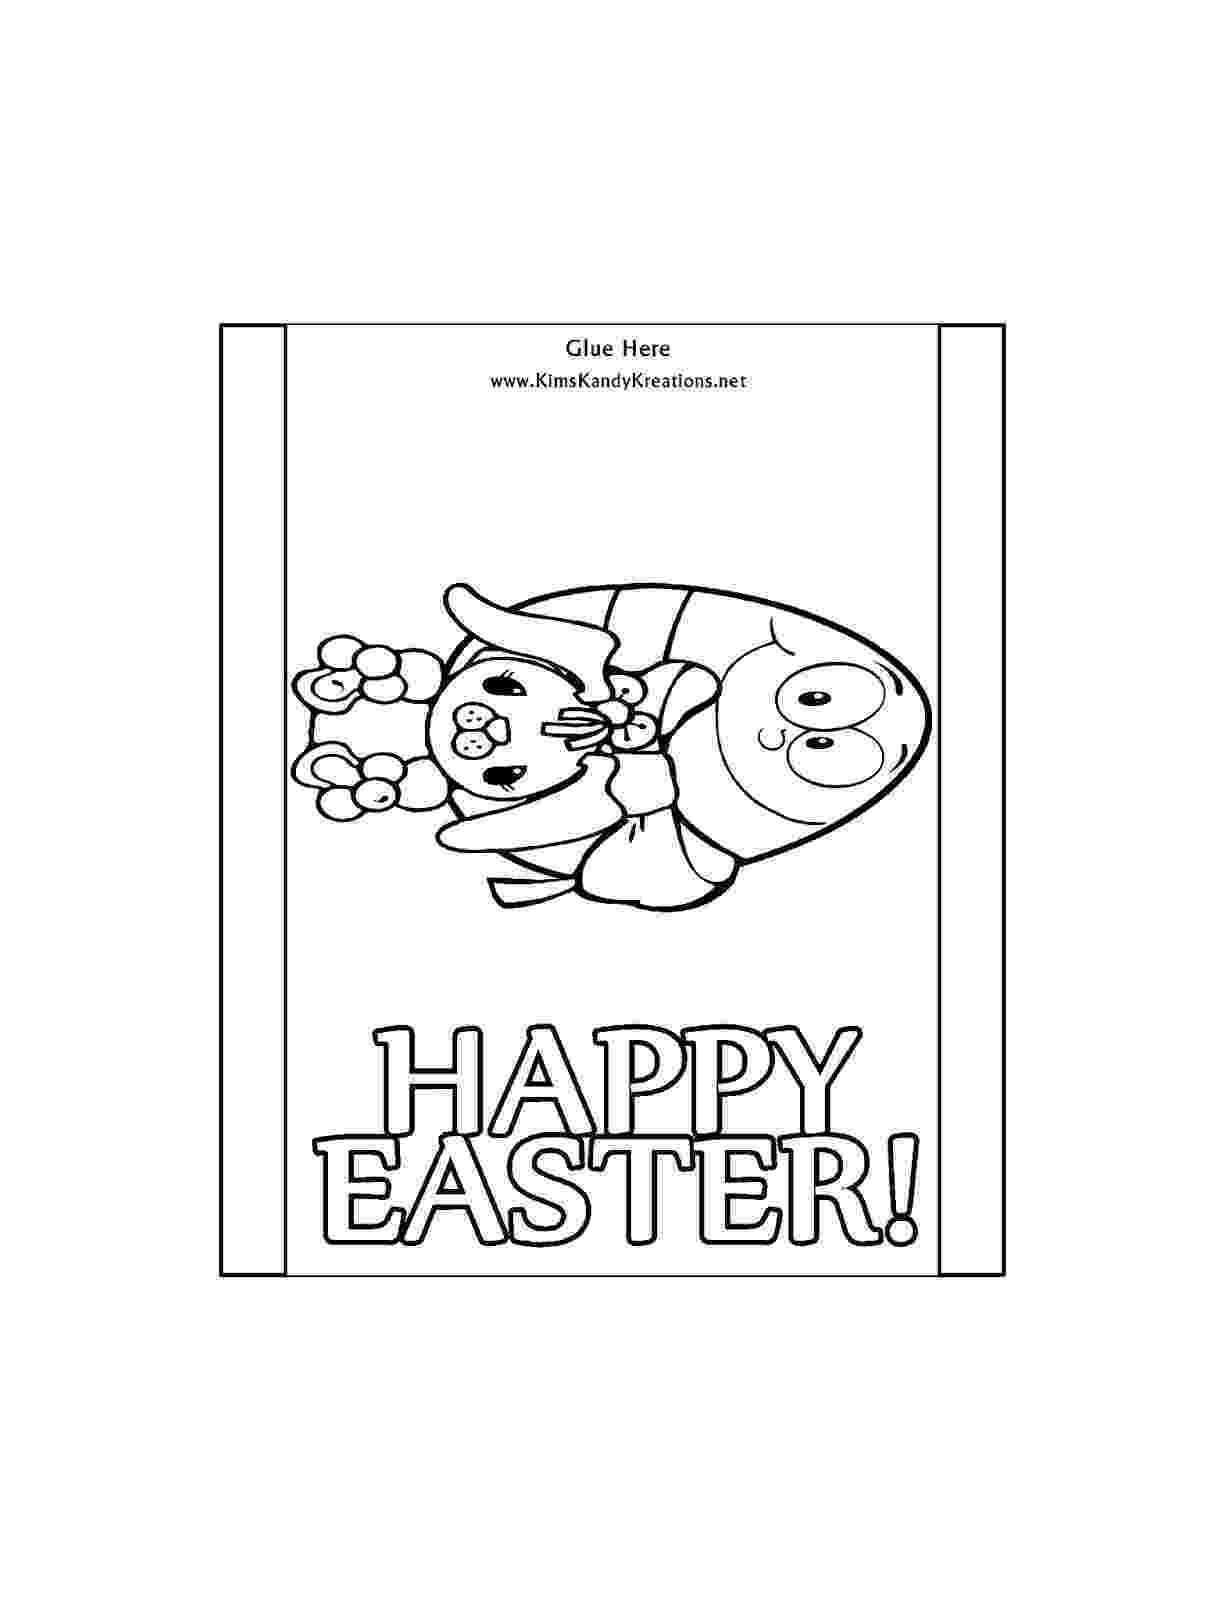 chocolate bar coloring page 12 best images about chocolate on pinterest word search coloring page chocolate bar 